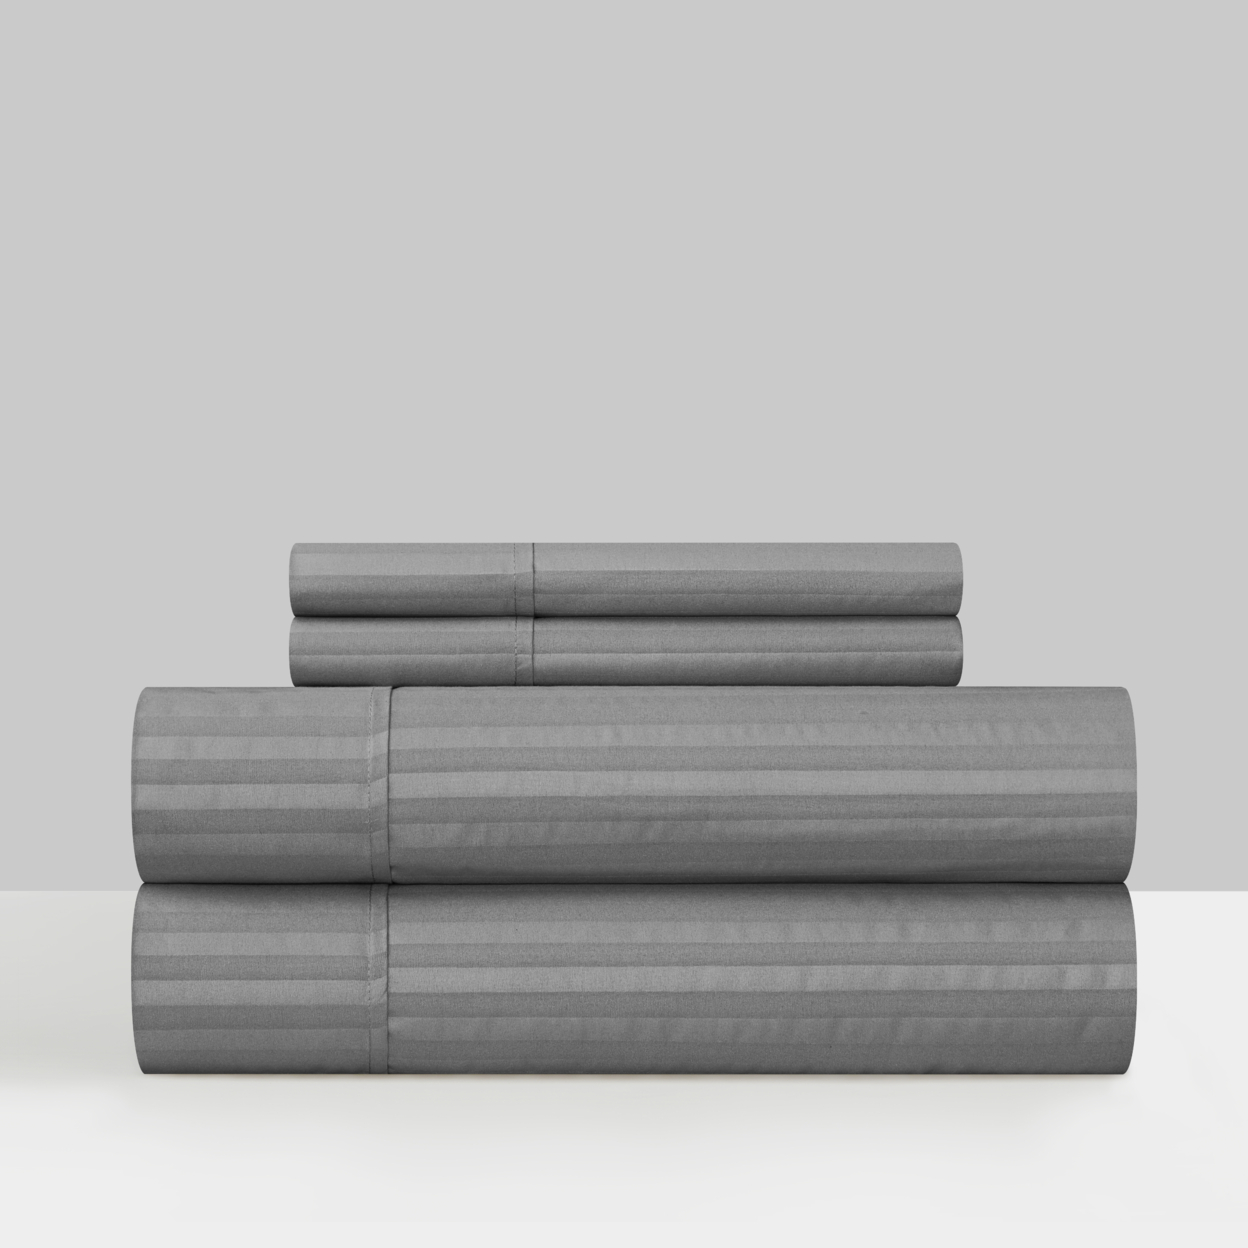 Shina 3 Or 4 Piece Sheet Set Solid Color Striped Pattern Technique - Grey, Twin